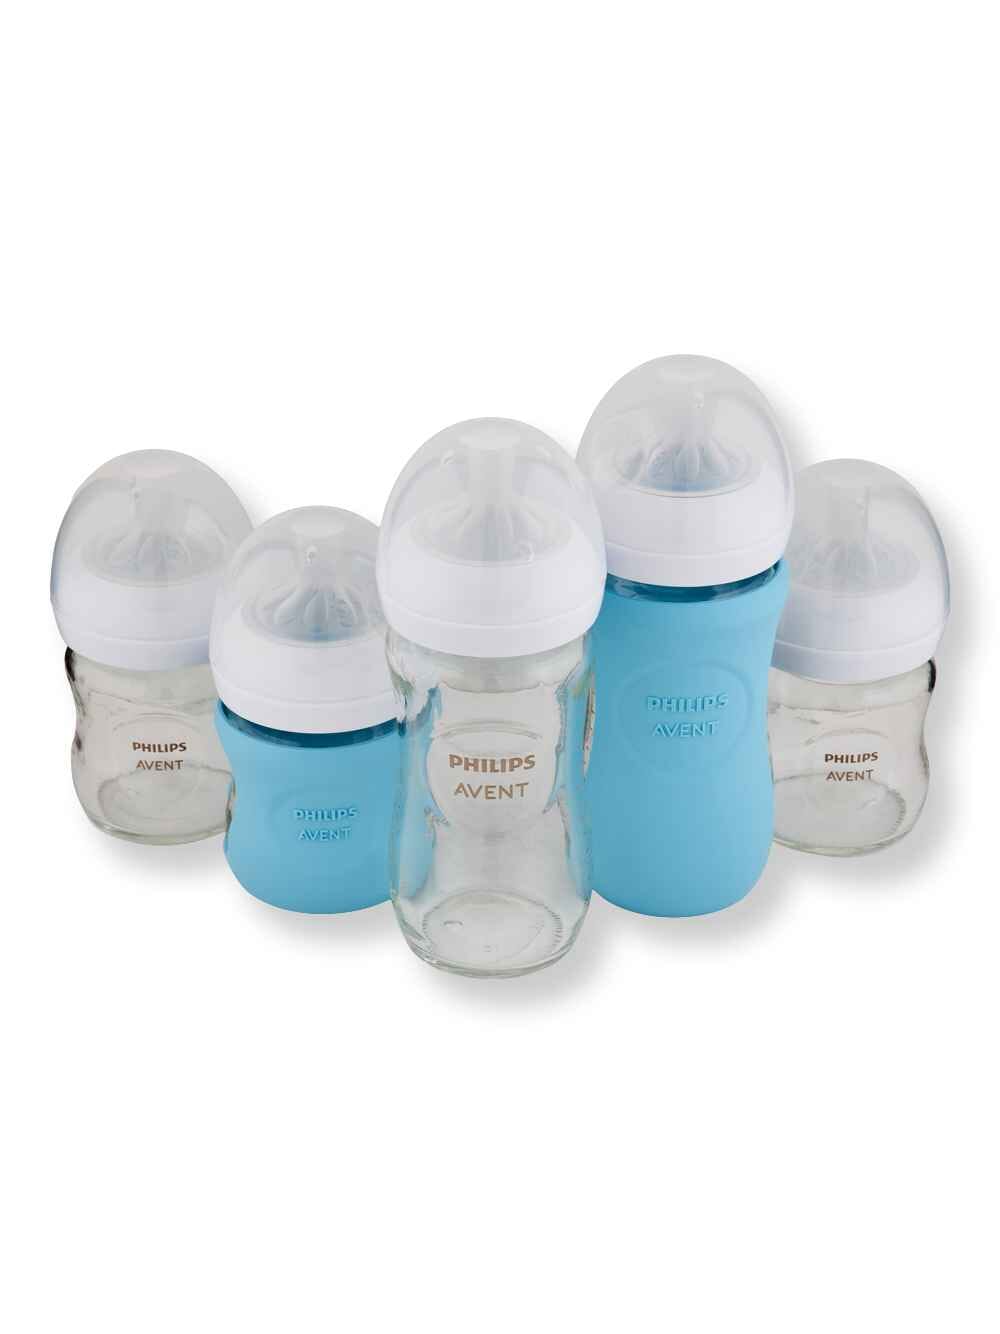 Philips Avent Philips Avent Glass Natural Bottle with Natural Response Nipple Baby Set Maternity & Baby Value Sets 